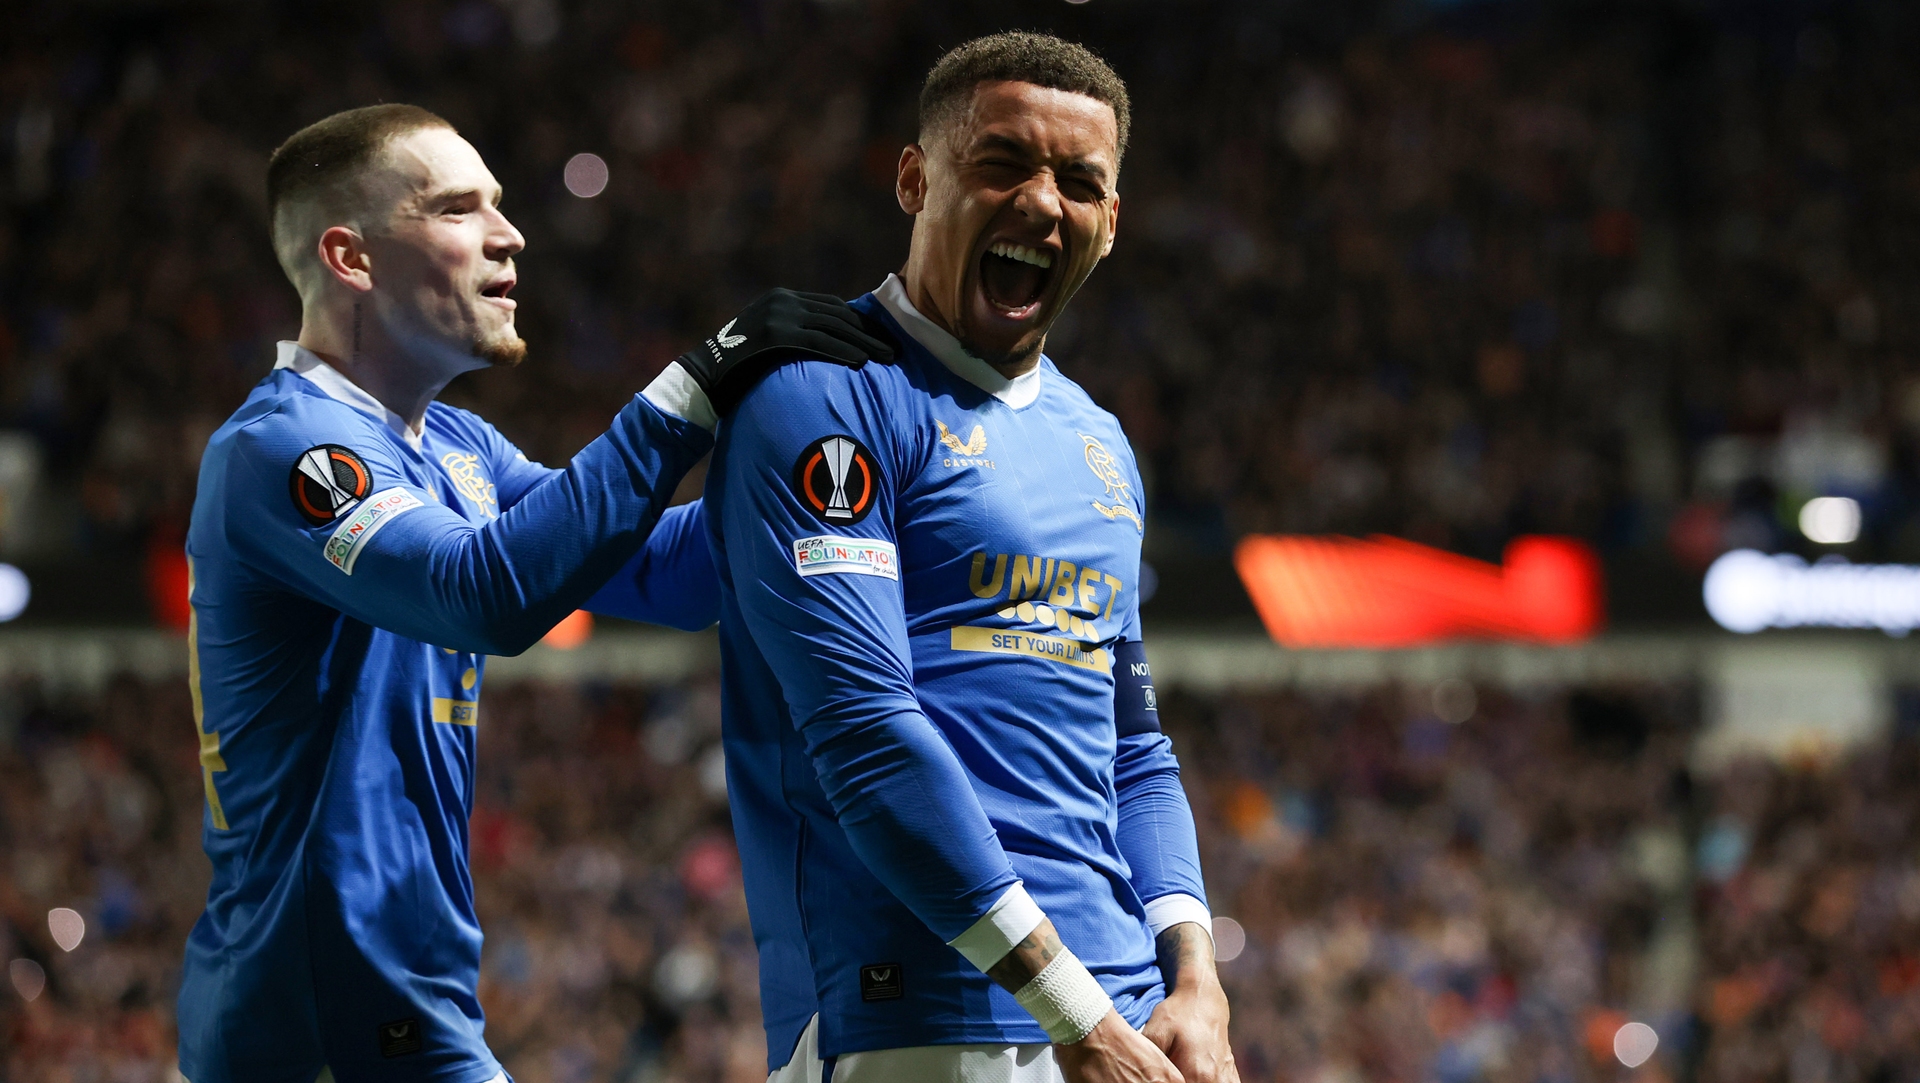 GLASGOW, SCOTLAND - APRIL 14: Rangers' James Tavernier celebrates making it 2-0 from the penalty spot during a UEFA Europa League Quarter Final 2nd Leg match between Rangers and SC Braga at Ibrox, on April 14, 2022, in Glasgow, Scotland.  (Photo by Craig Williamson / SNS Group)